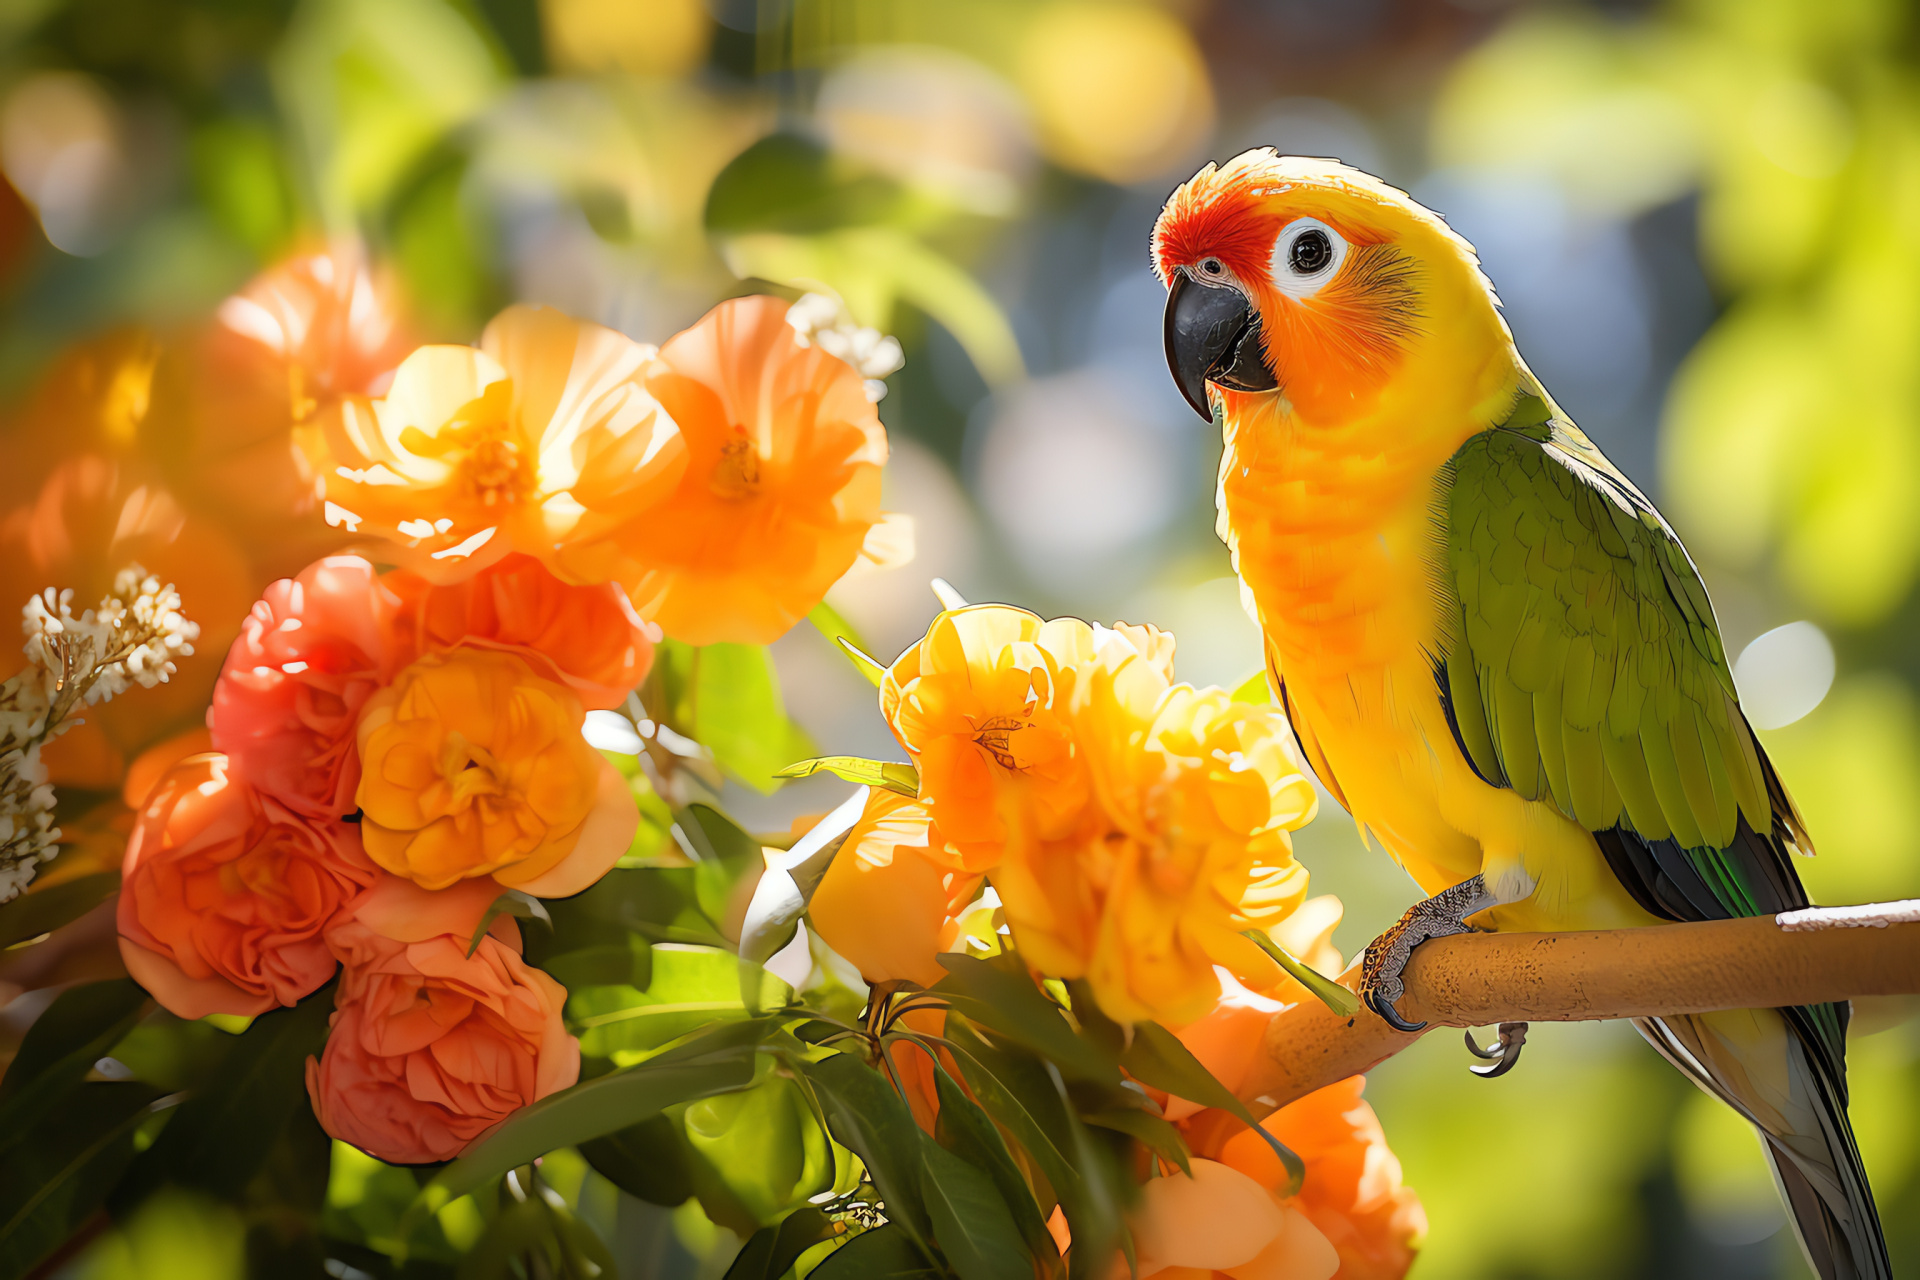 Sun Conure, Ornithological species, Orange and yellow bird, Green feather highlights, Naturalist's dream, HD Desktop Image